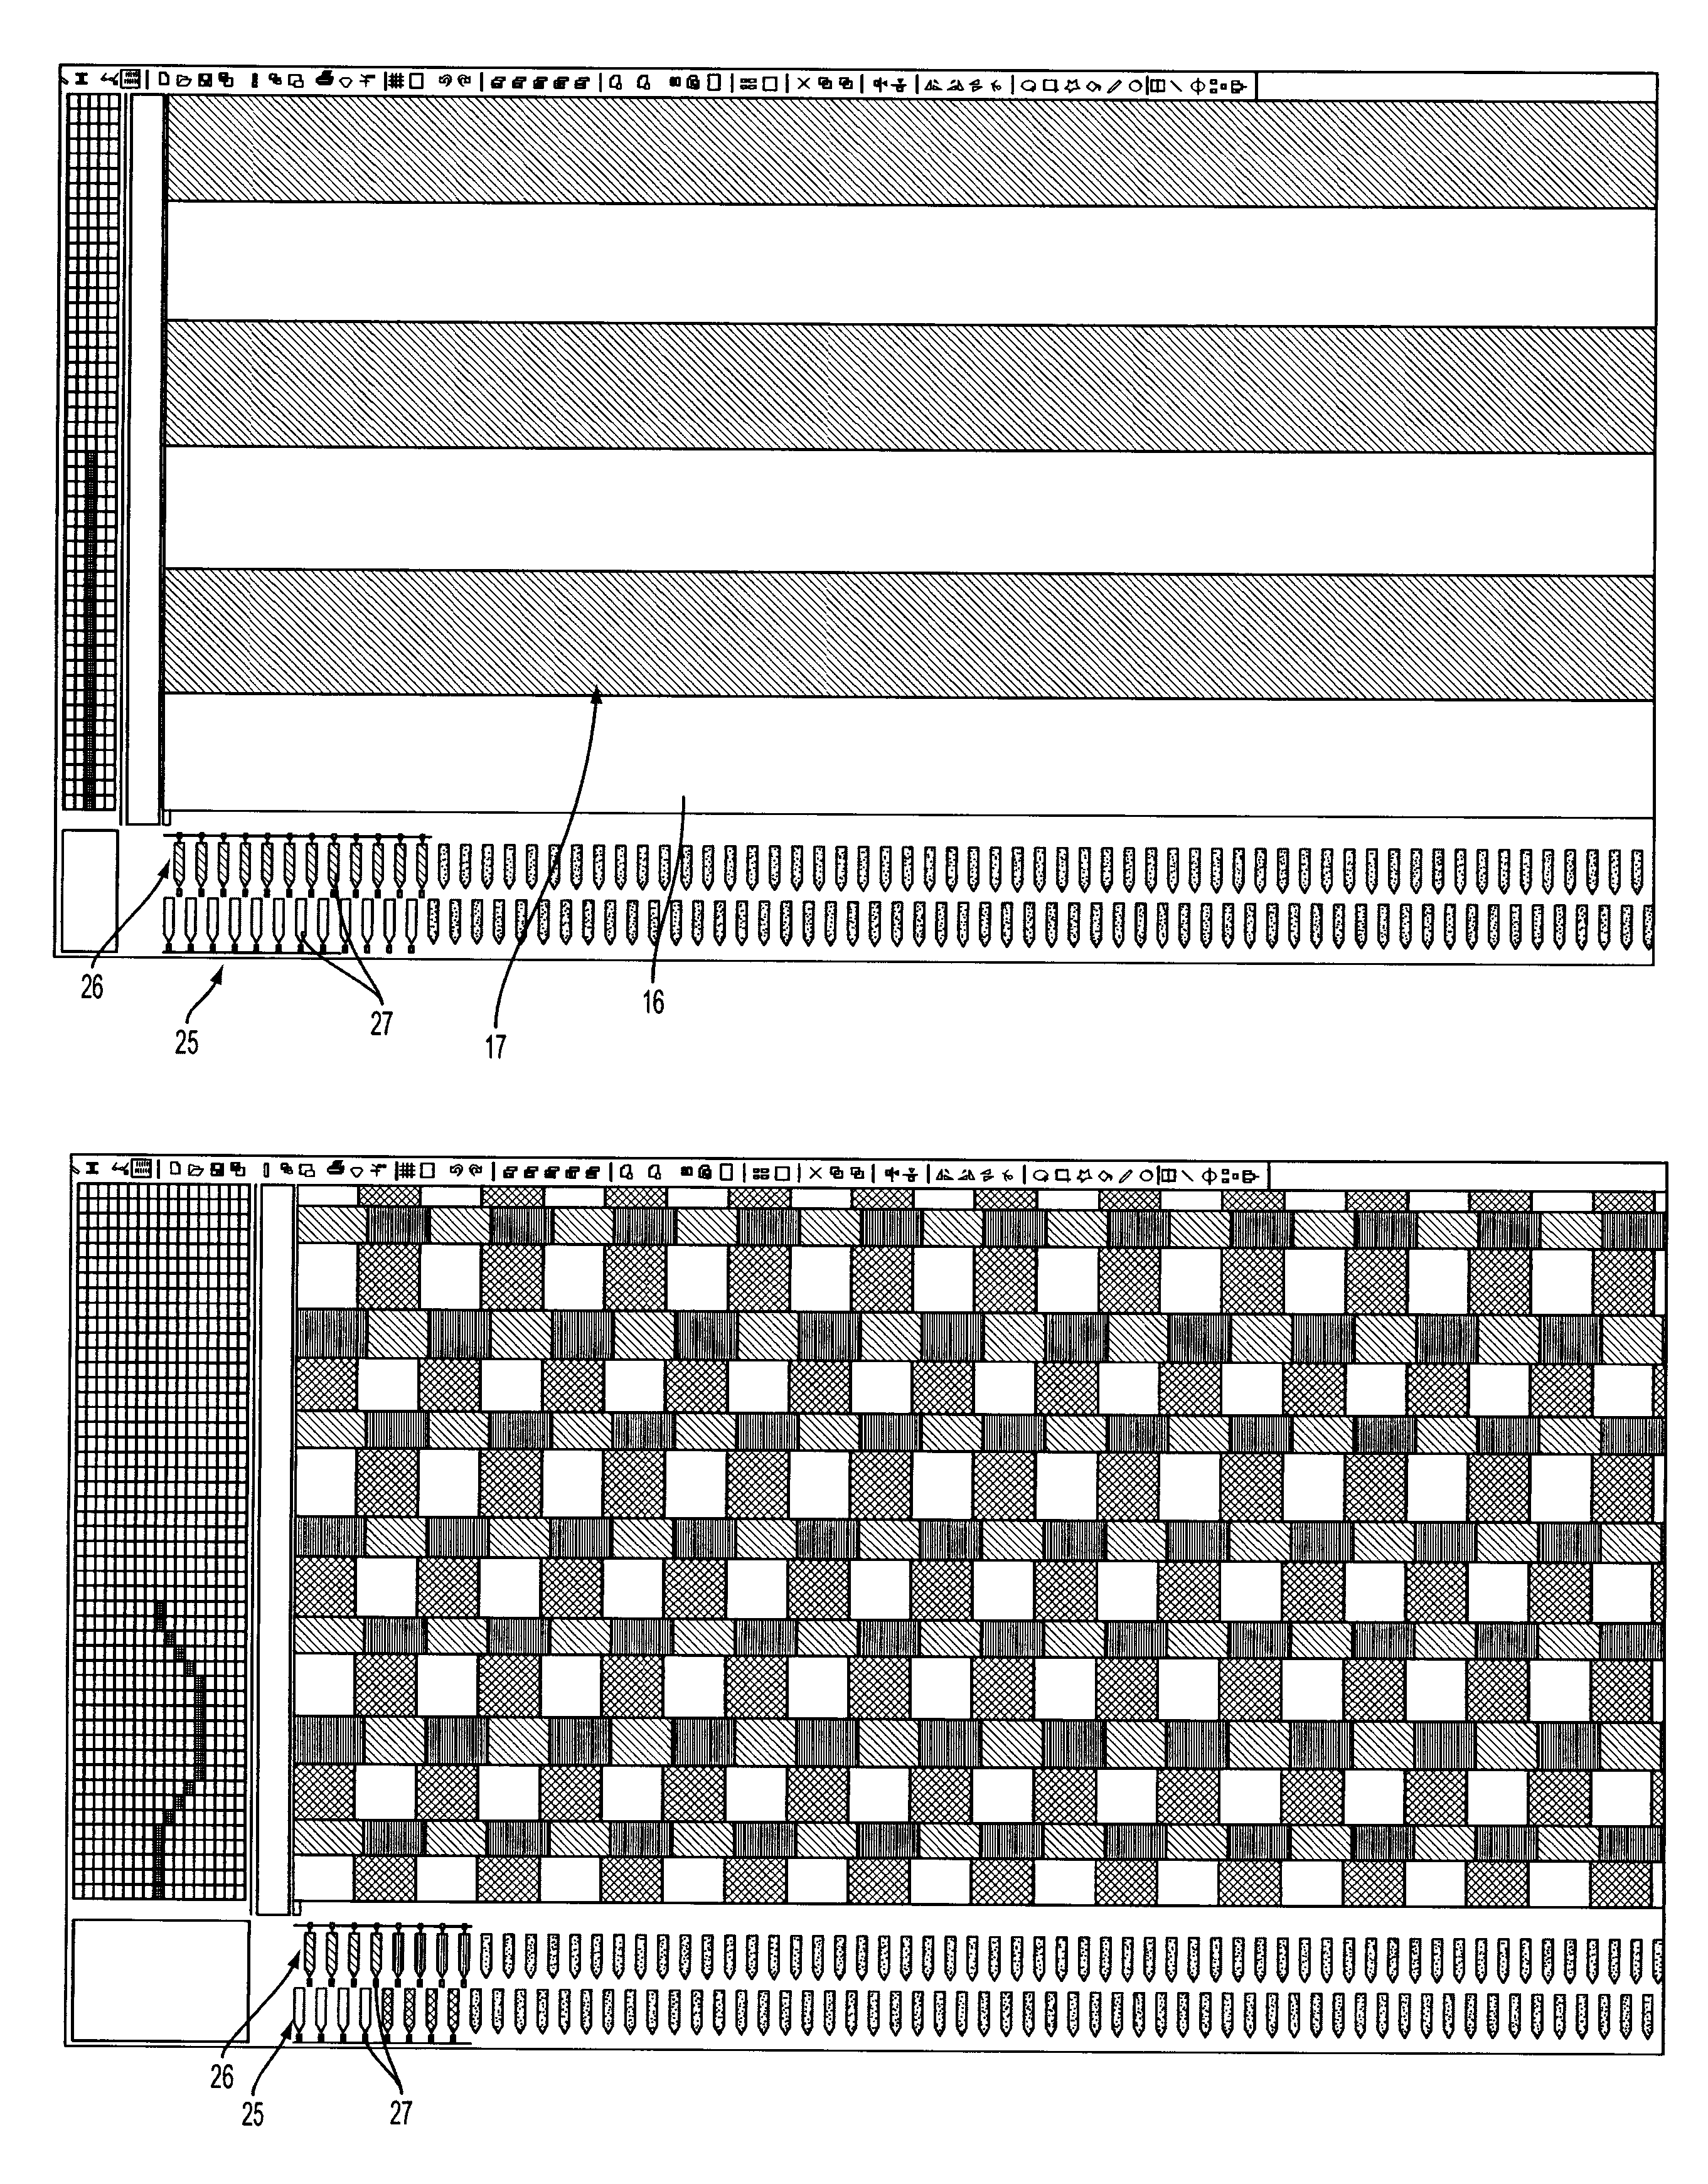 System and method for formation of woven style tufted cut/loop fabrics